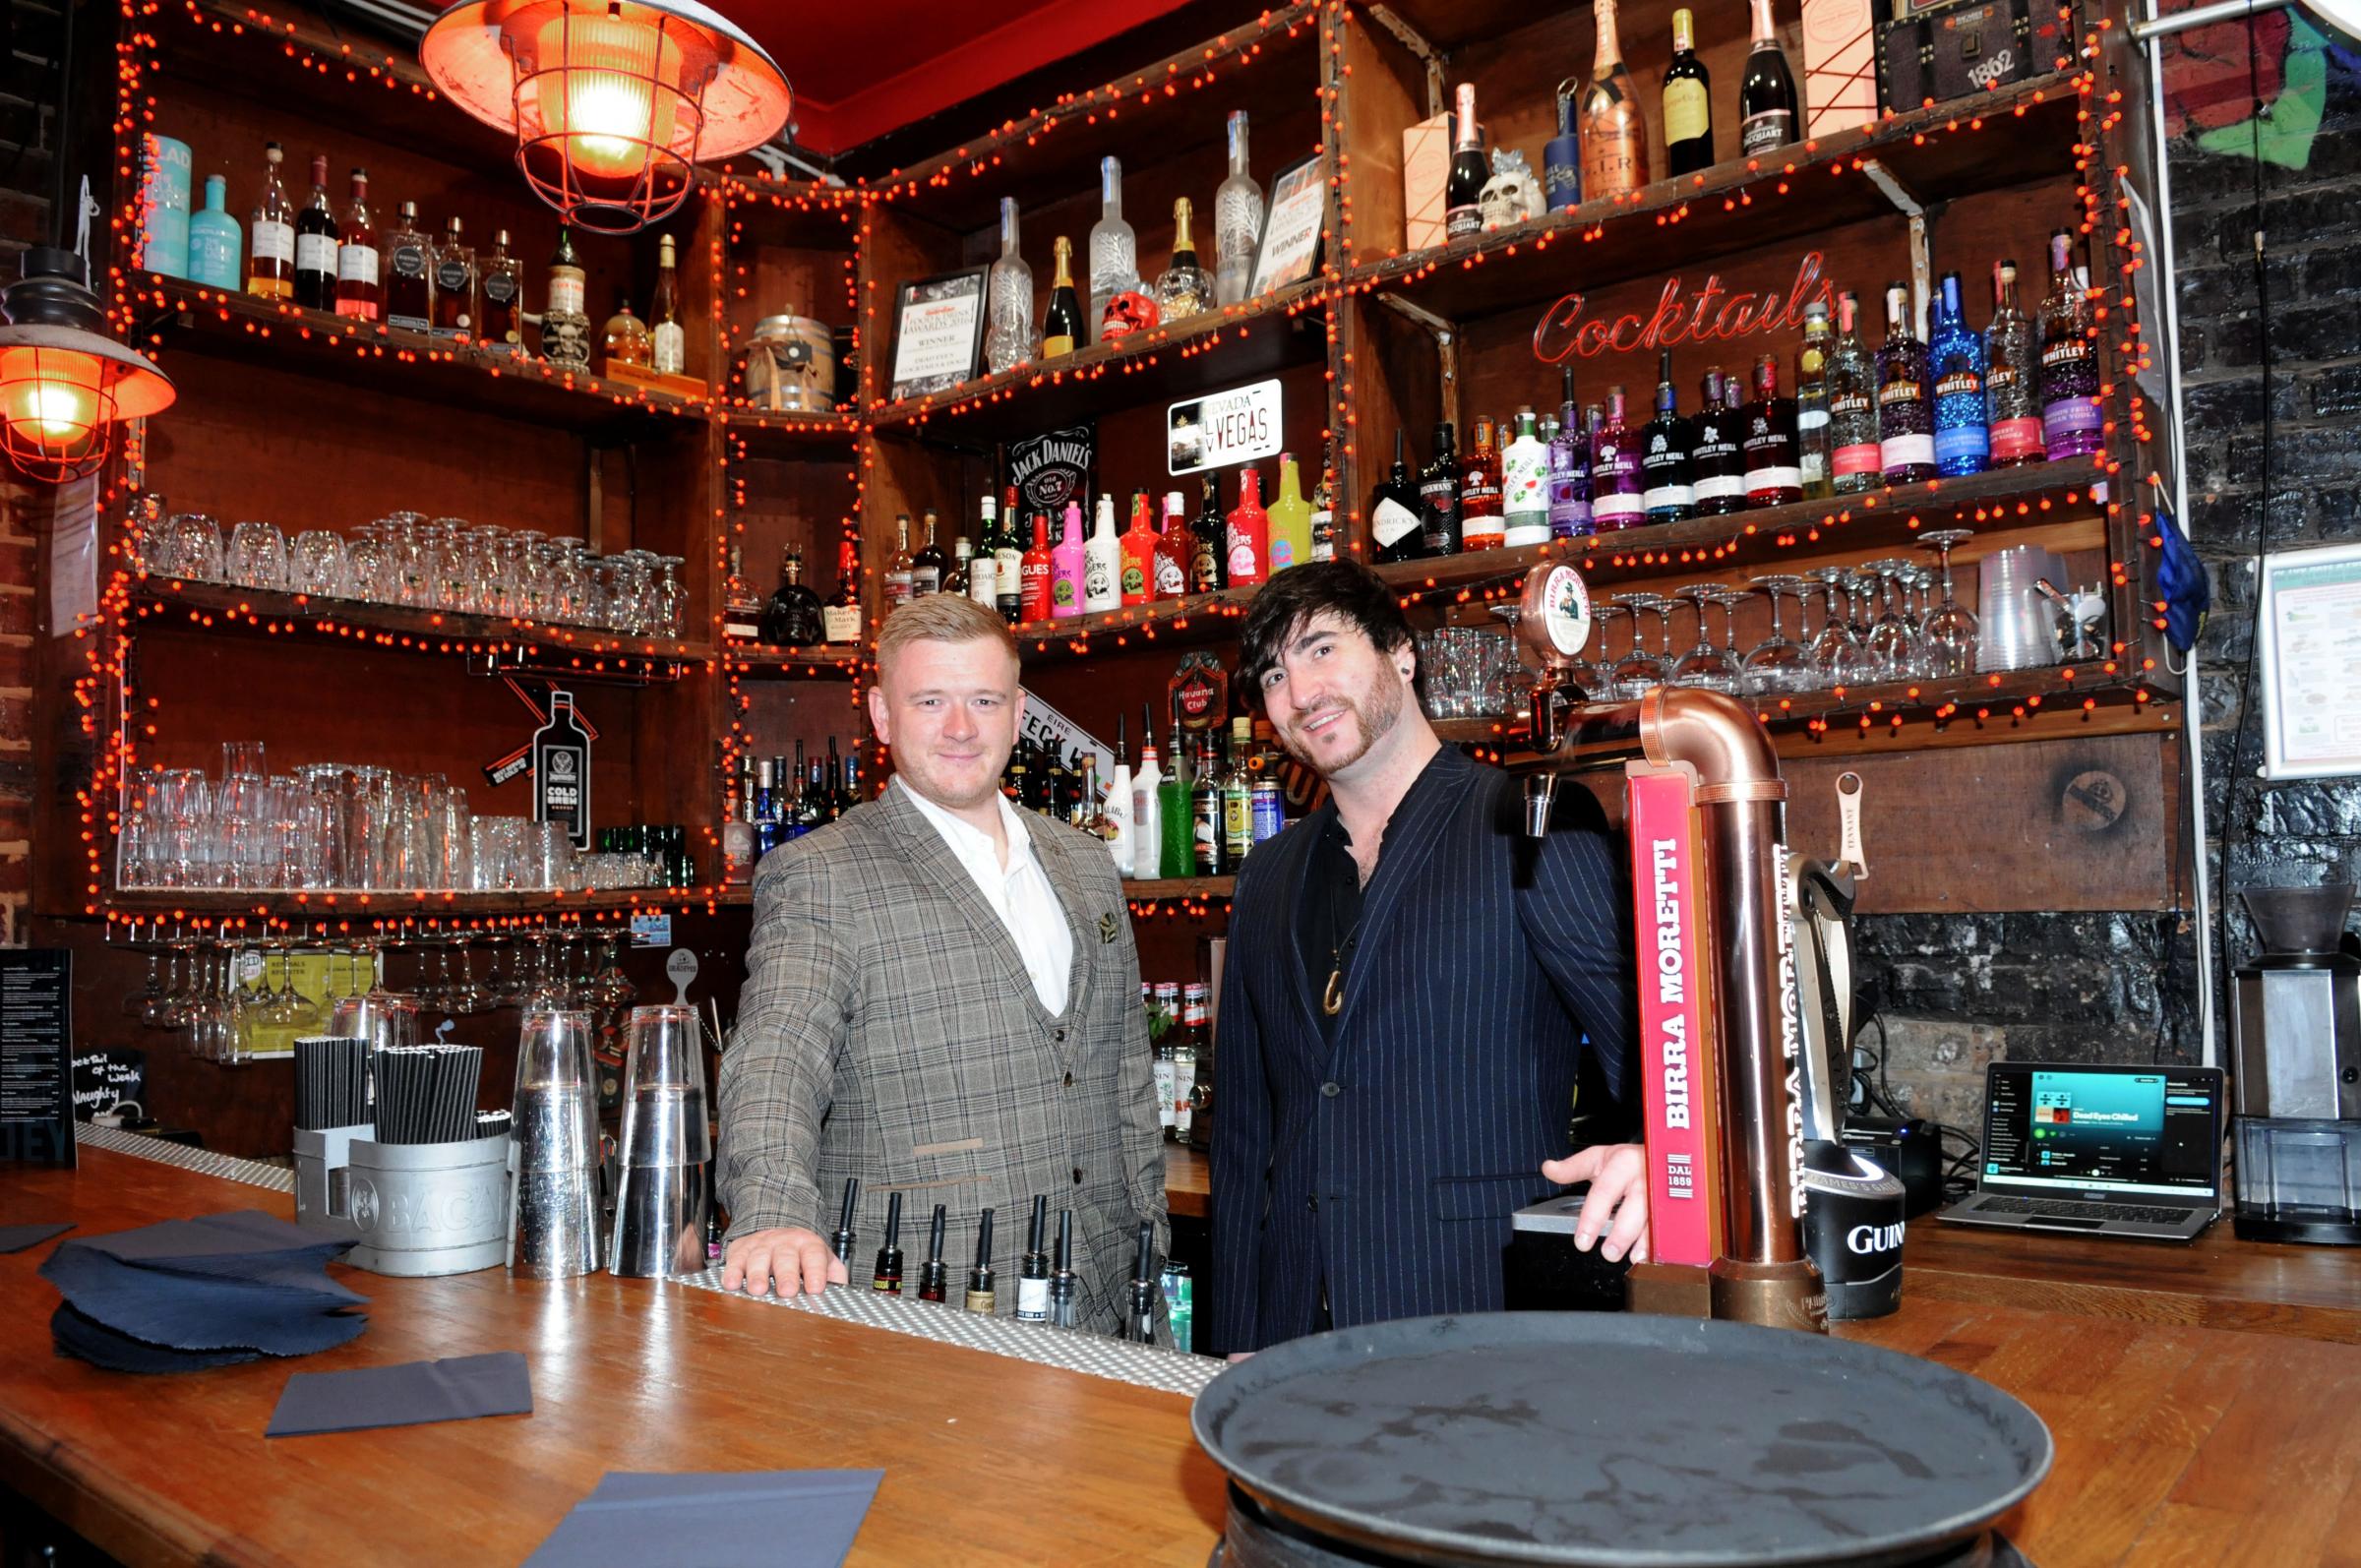 Graeme Keast (left) and Alex Tennant pictured at the bar in the gastropub